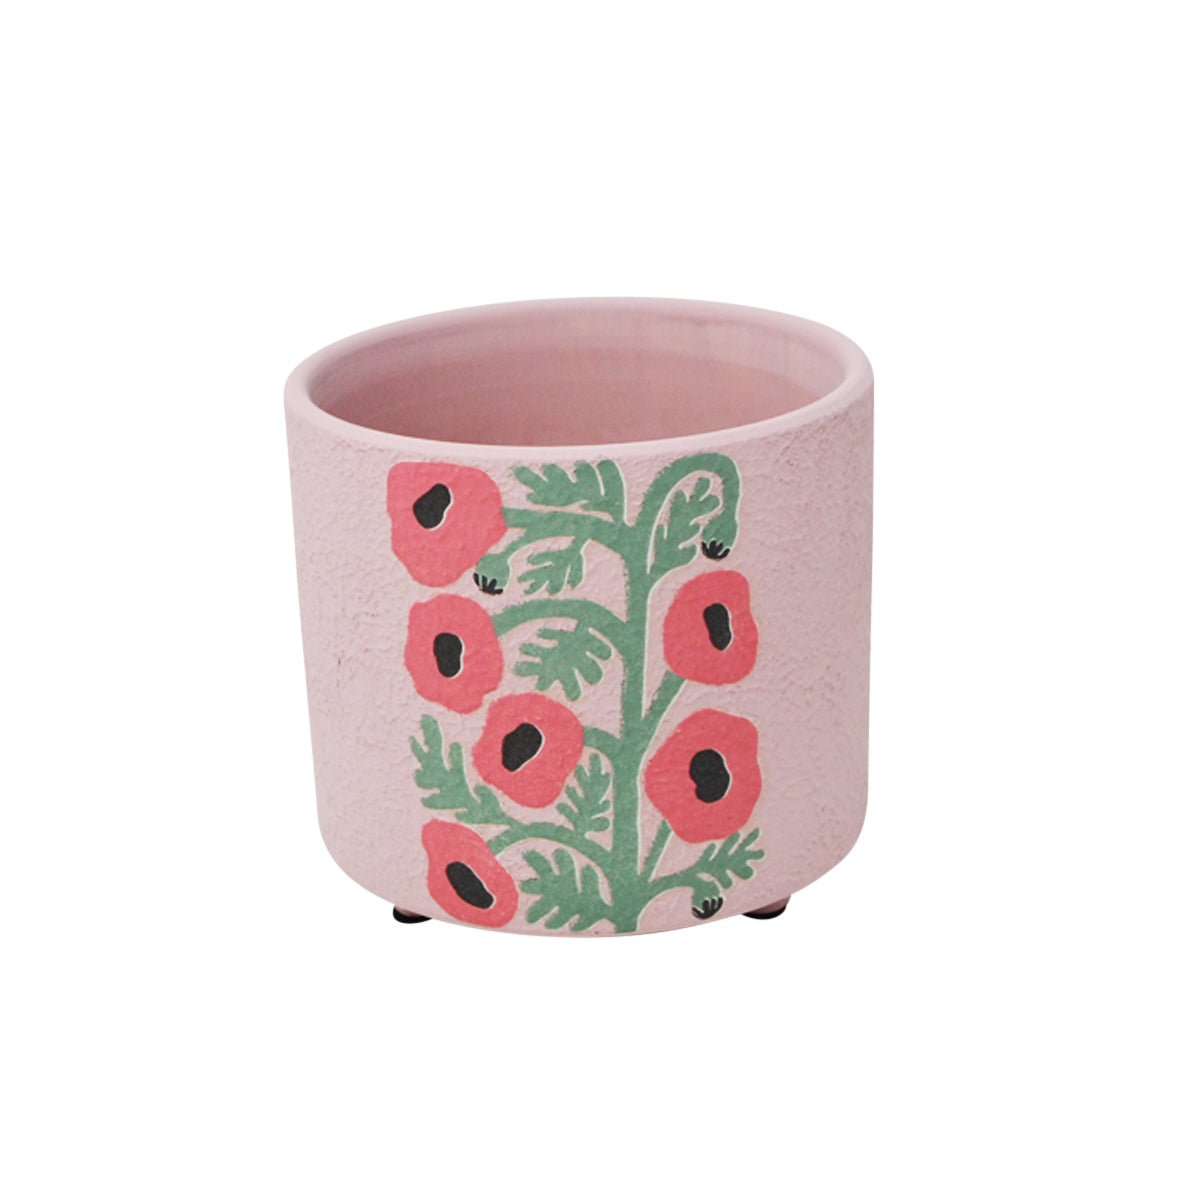 Painted Pot w/Floral Pattern - Echinacea